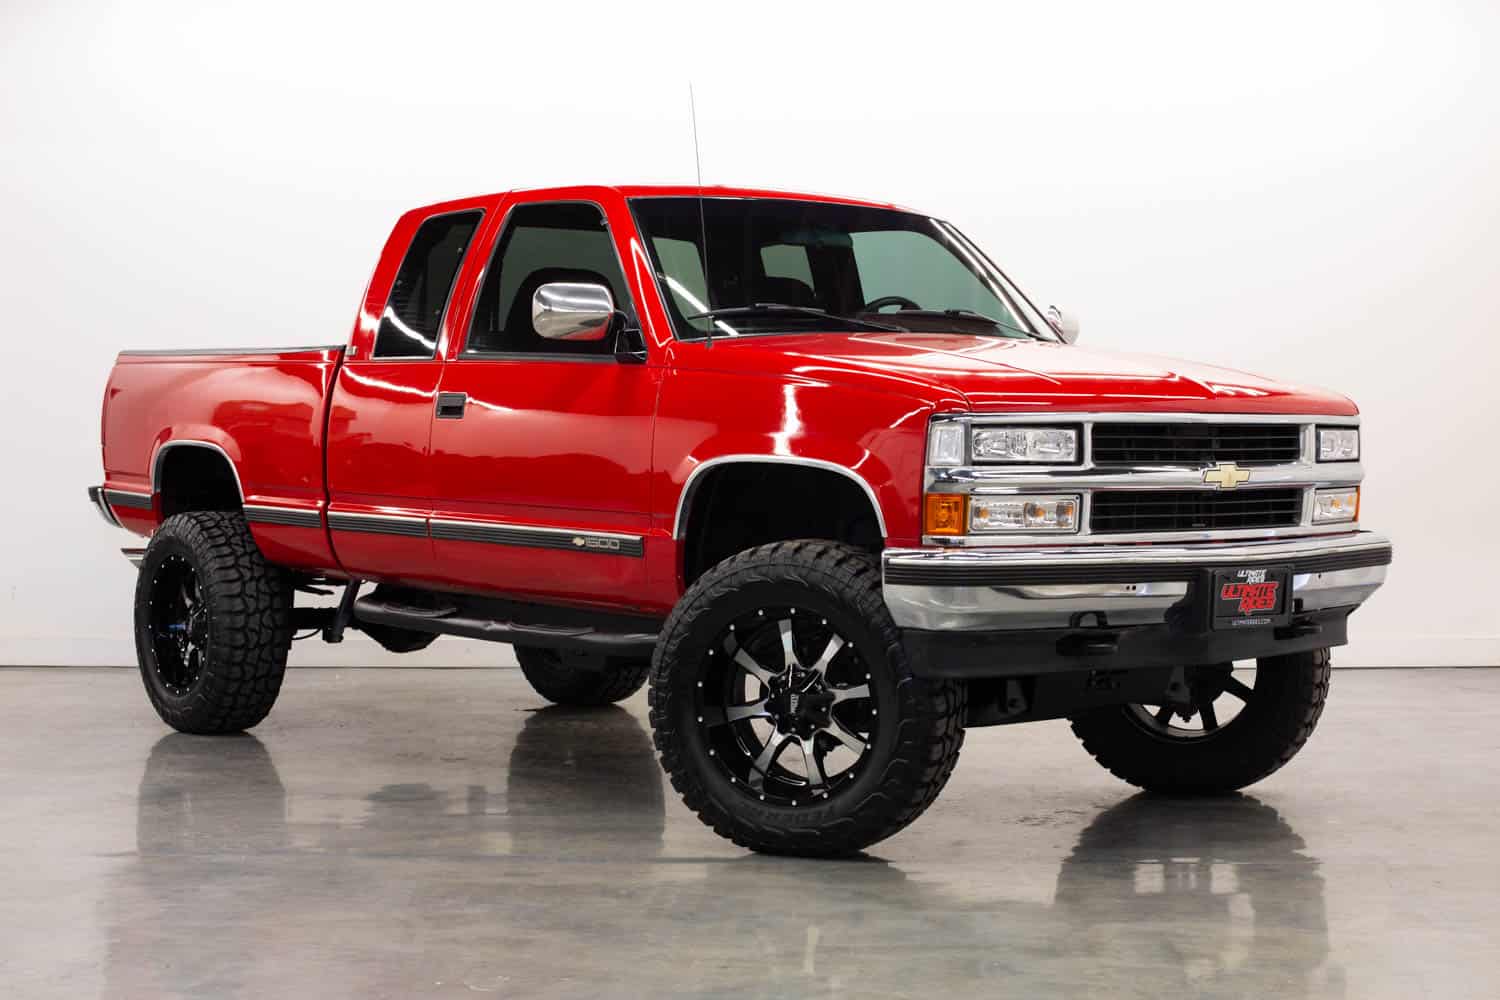 Lifted Trucks for Sale in Alabama